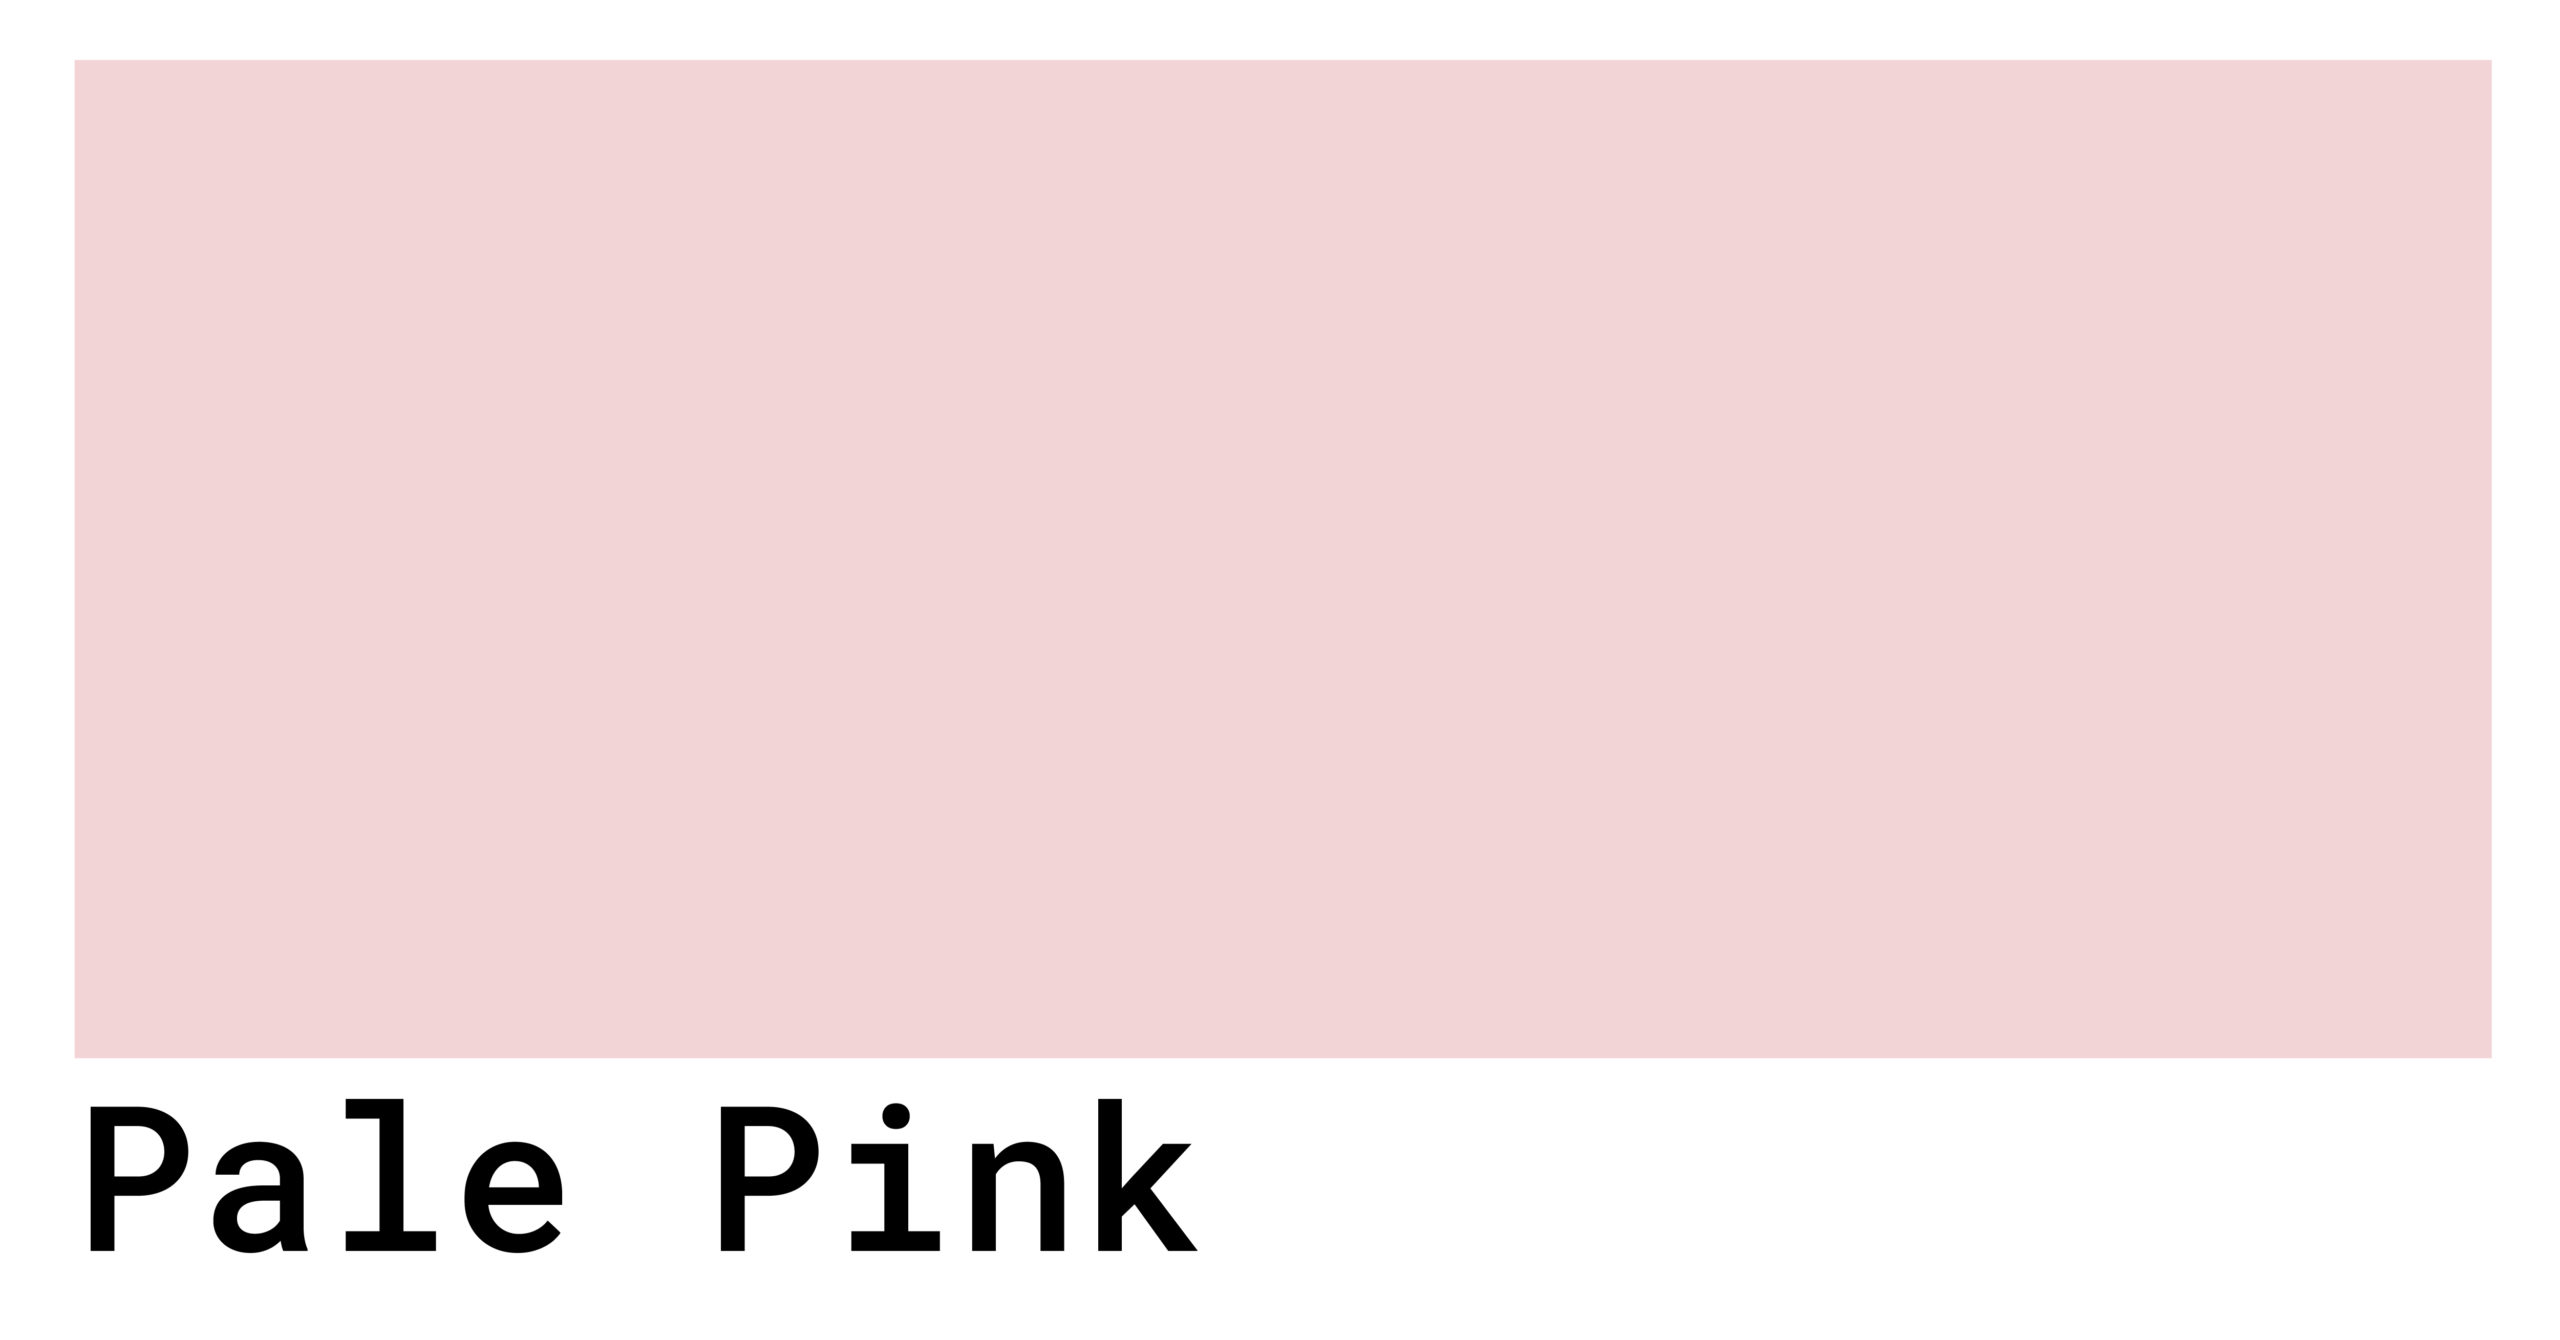 pale pink color swatch scaled